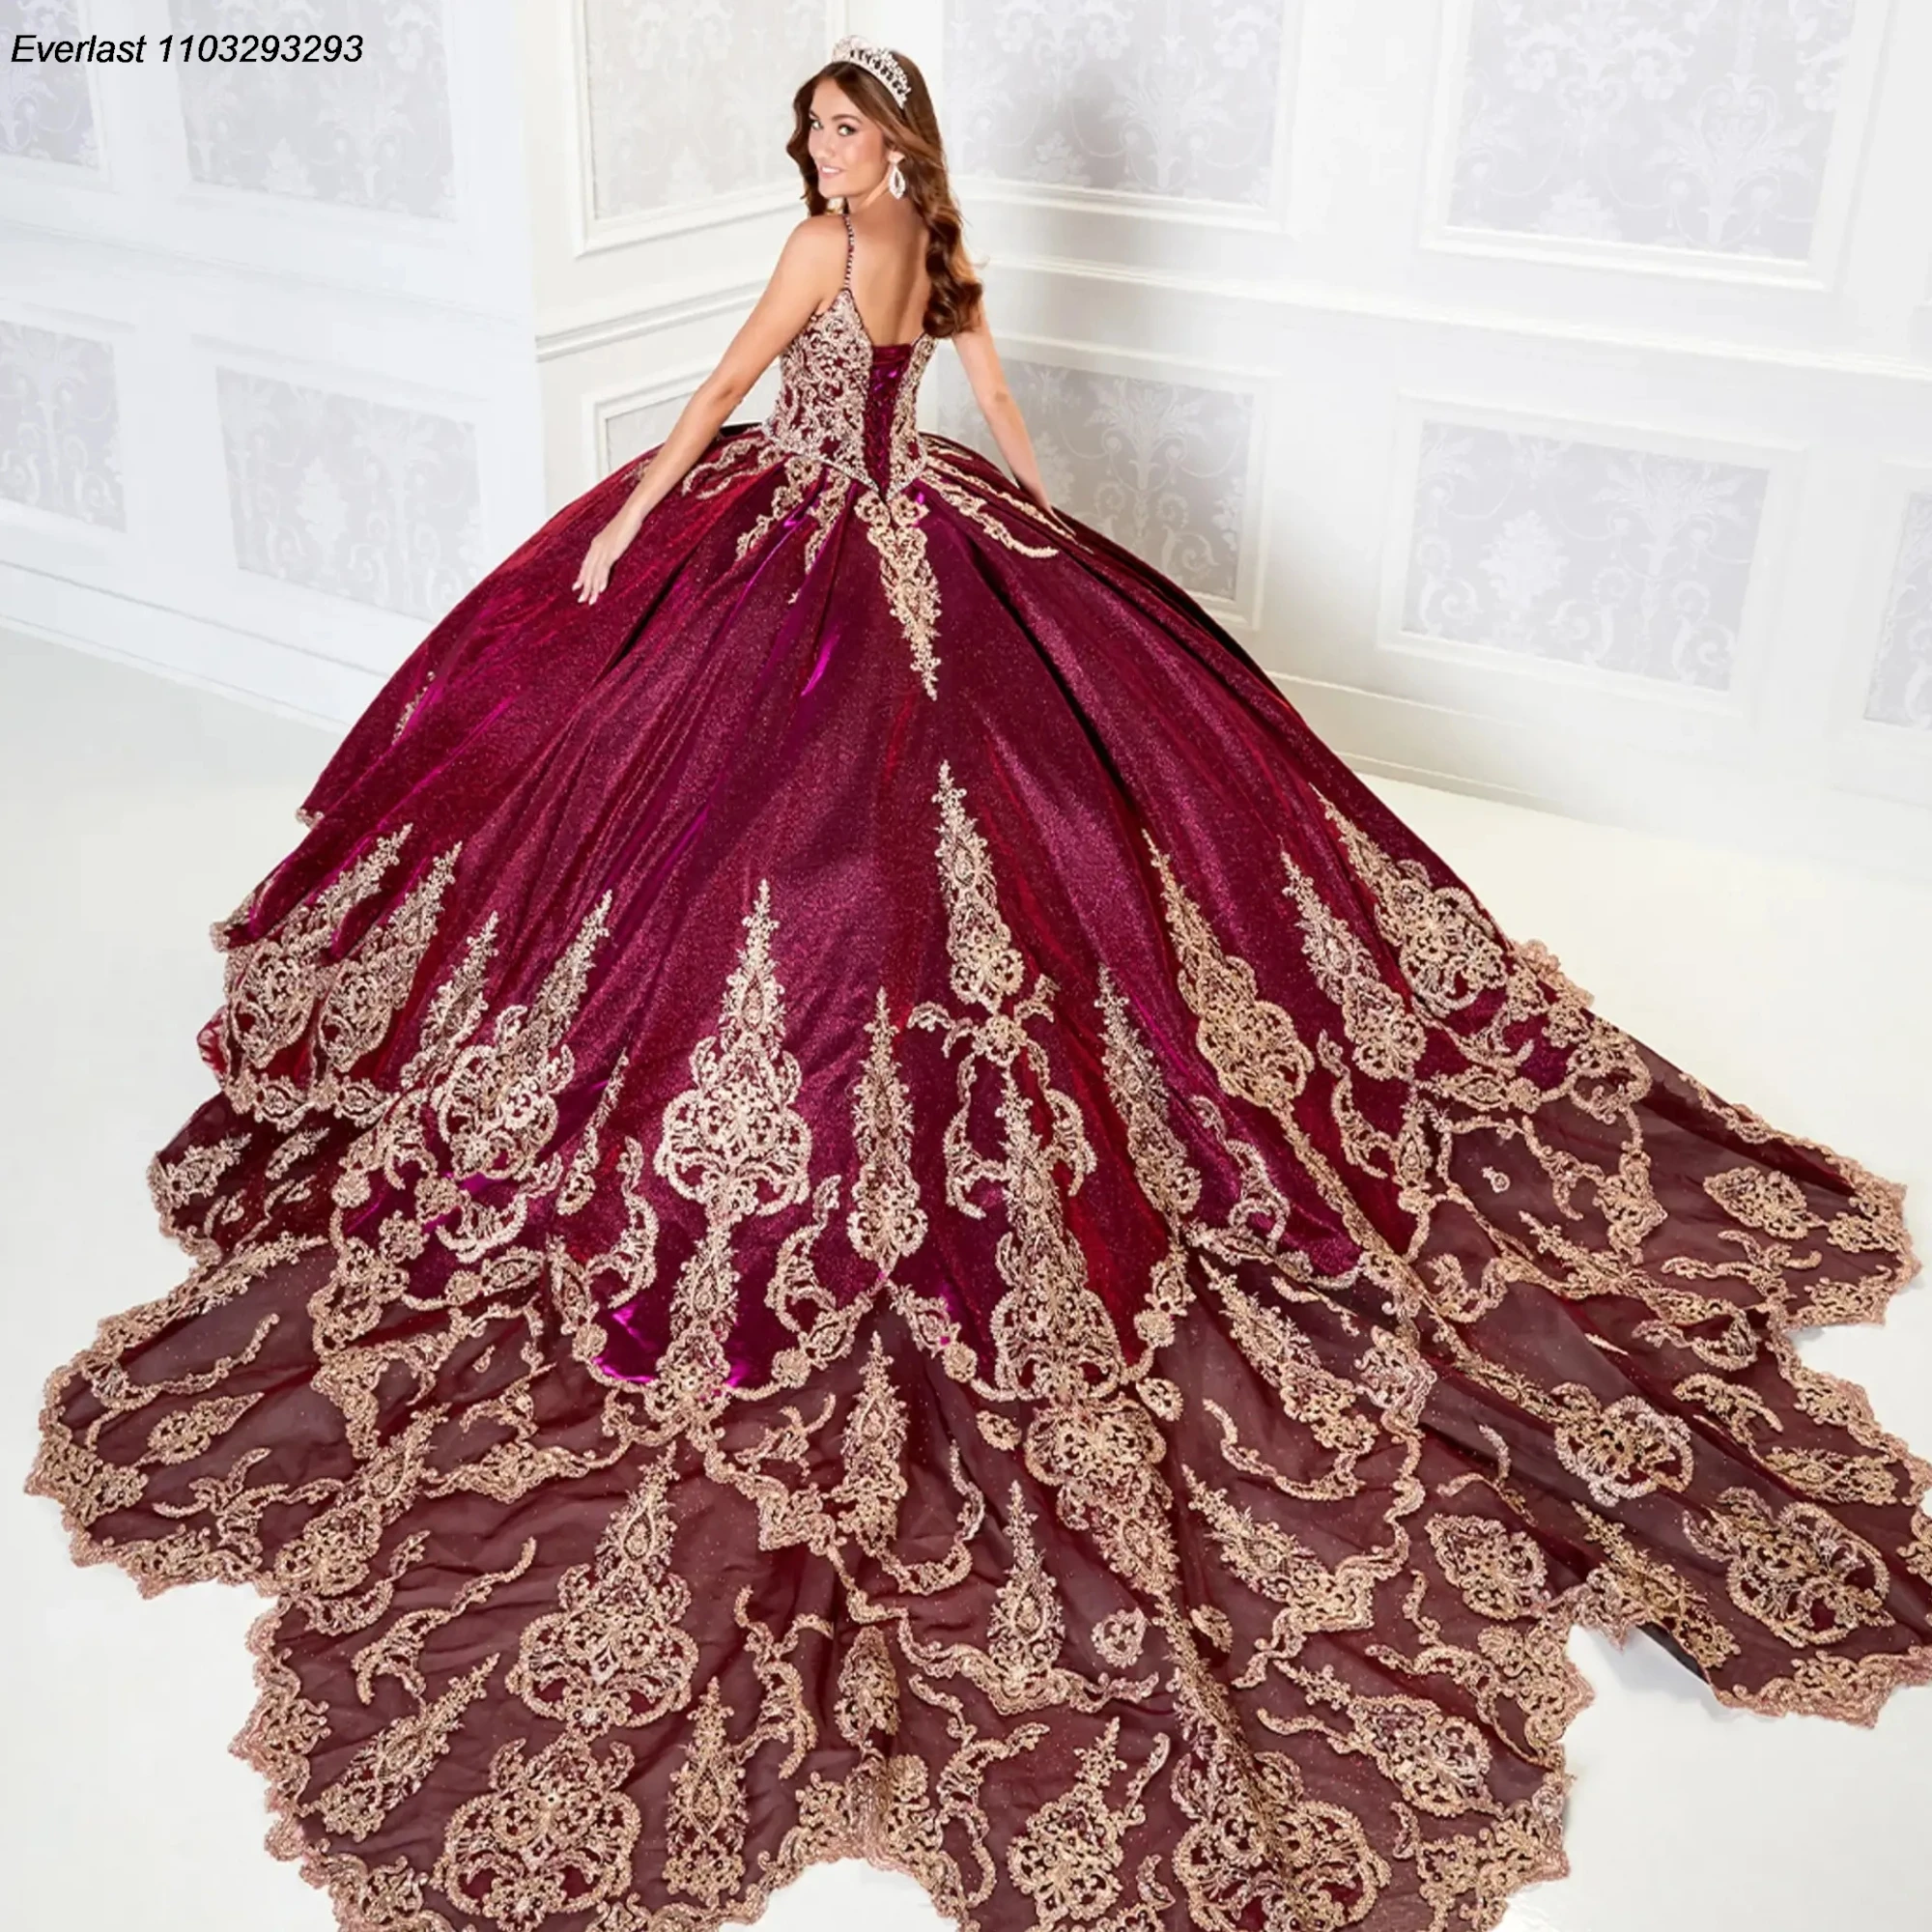 

EVLAST Purple Quinceanera Dress Ball Gown Gold Lace Applique Crystals Beaded With Cape Corset Sweet 16 Vestido De 15 Anos TQD339